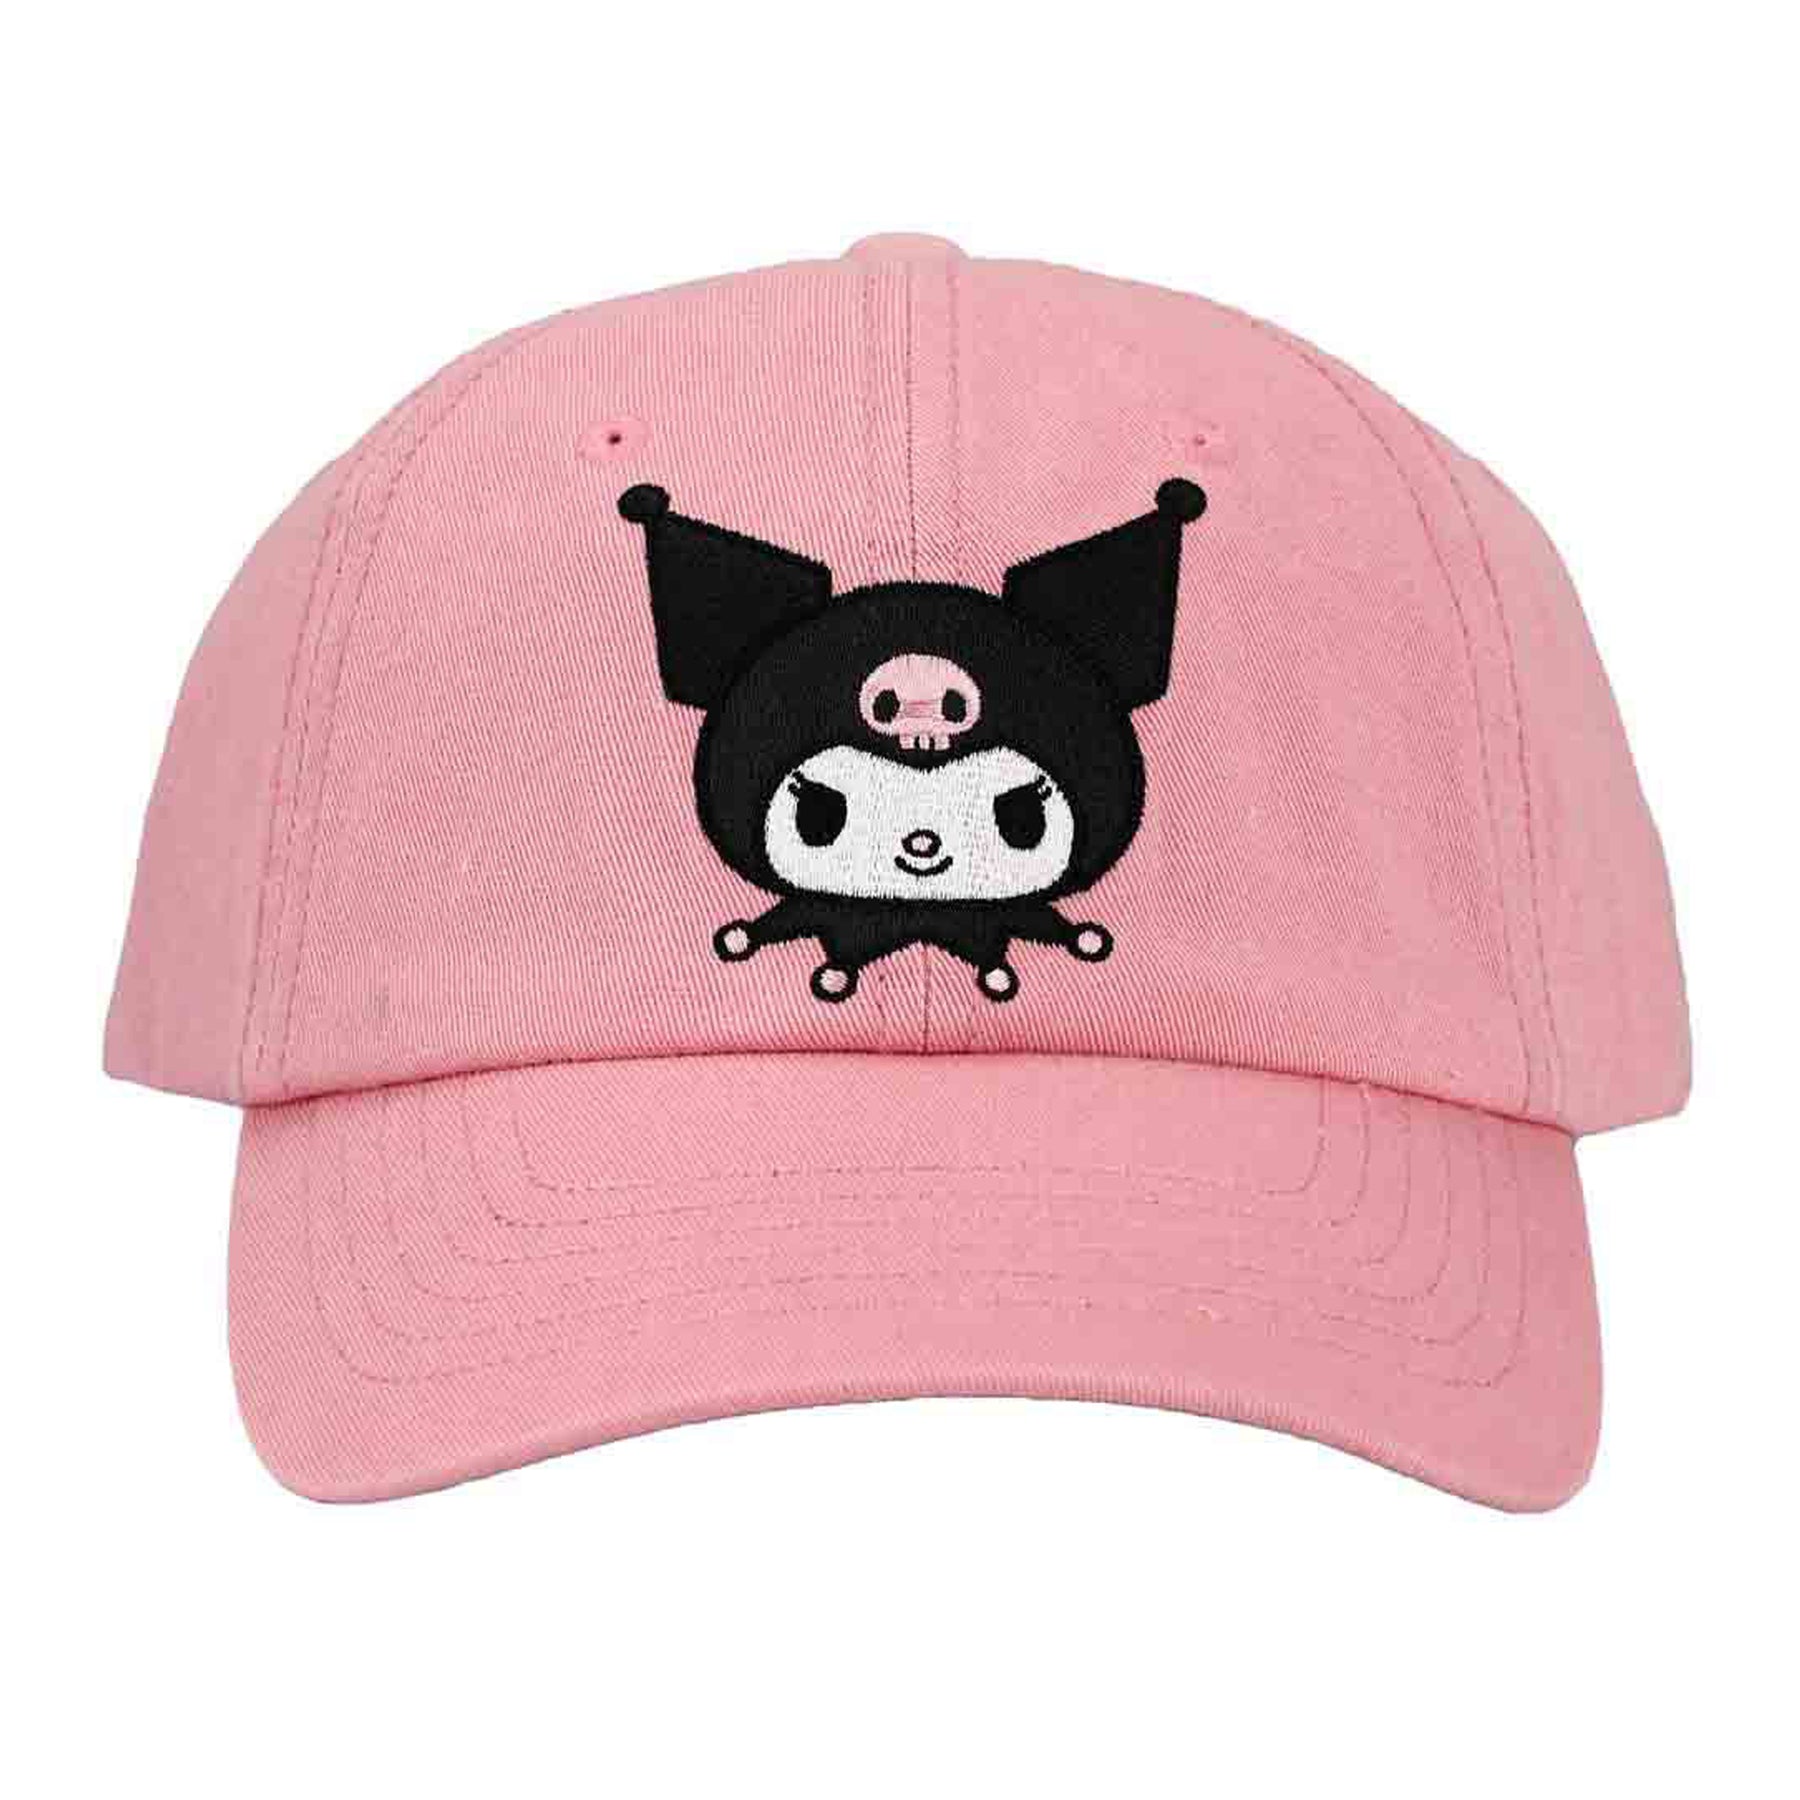 Sanrio Kuromi Embroidered Hat – The Pink a la Mode